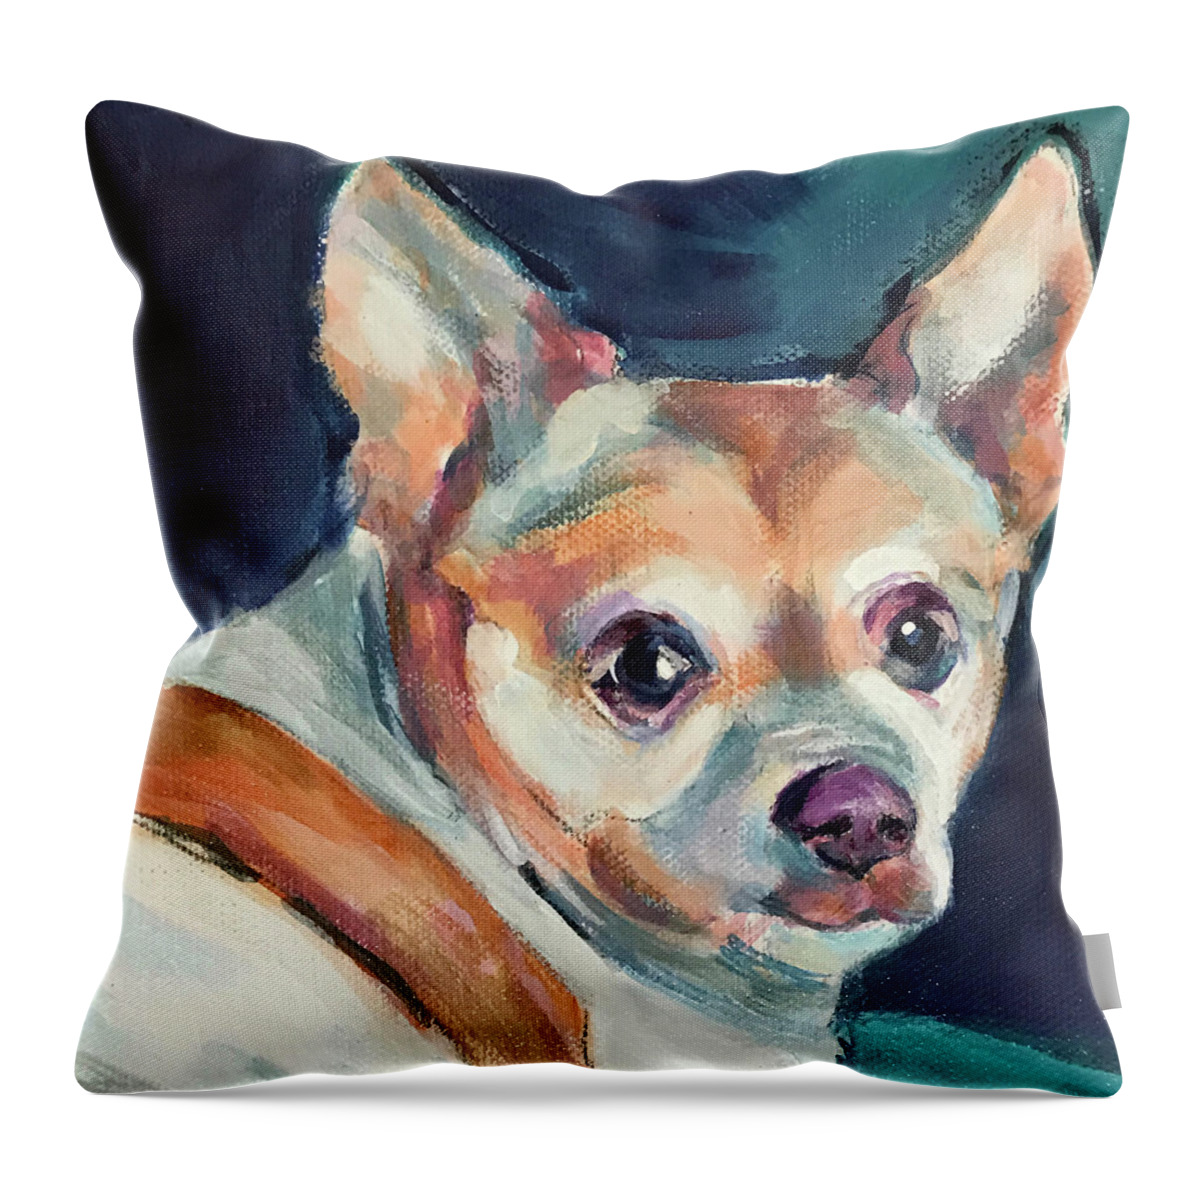  Throw Pillow featuring the painting Taco by Judy Rogan